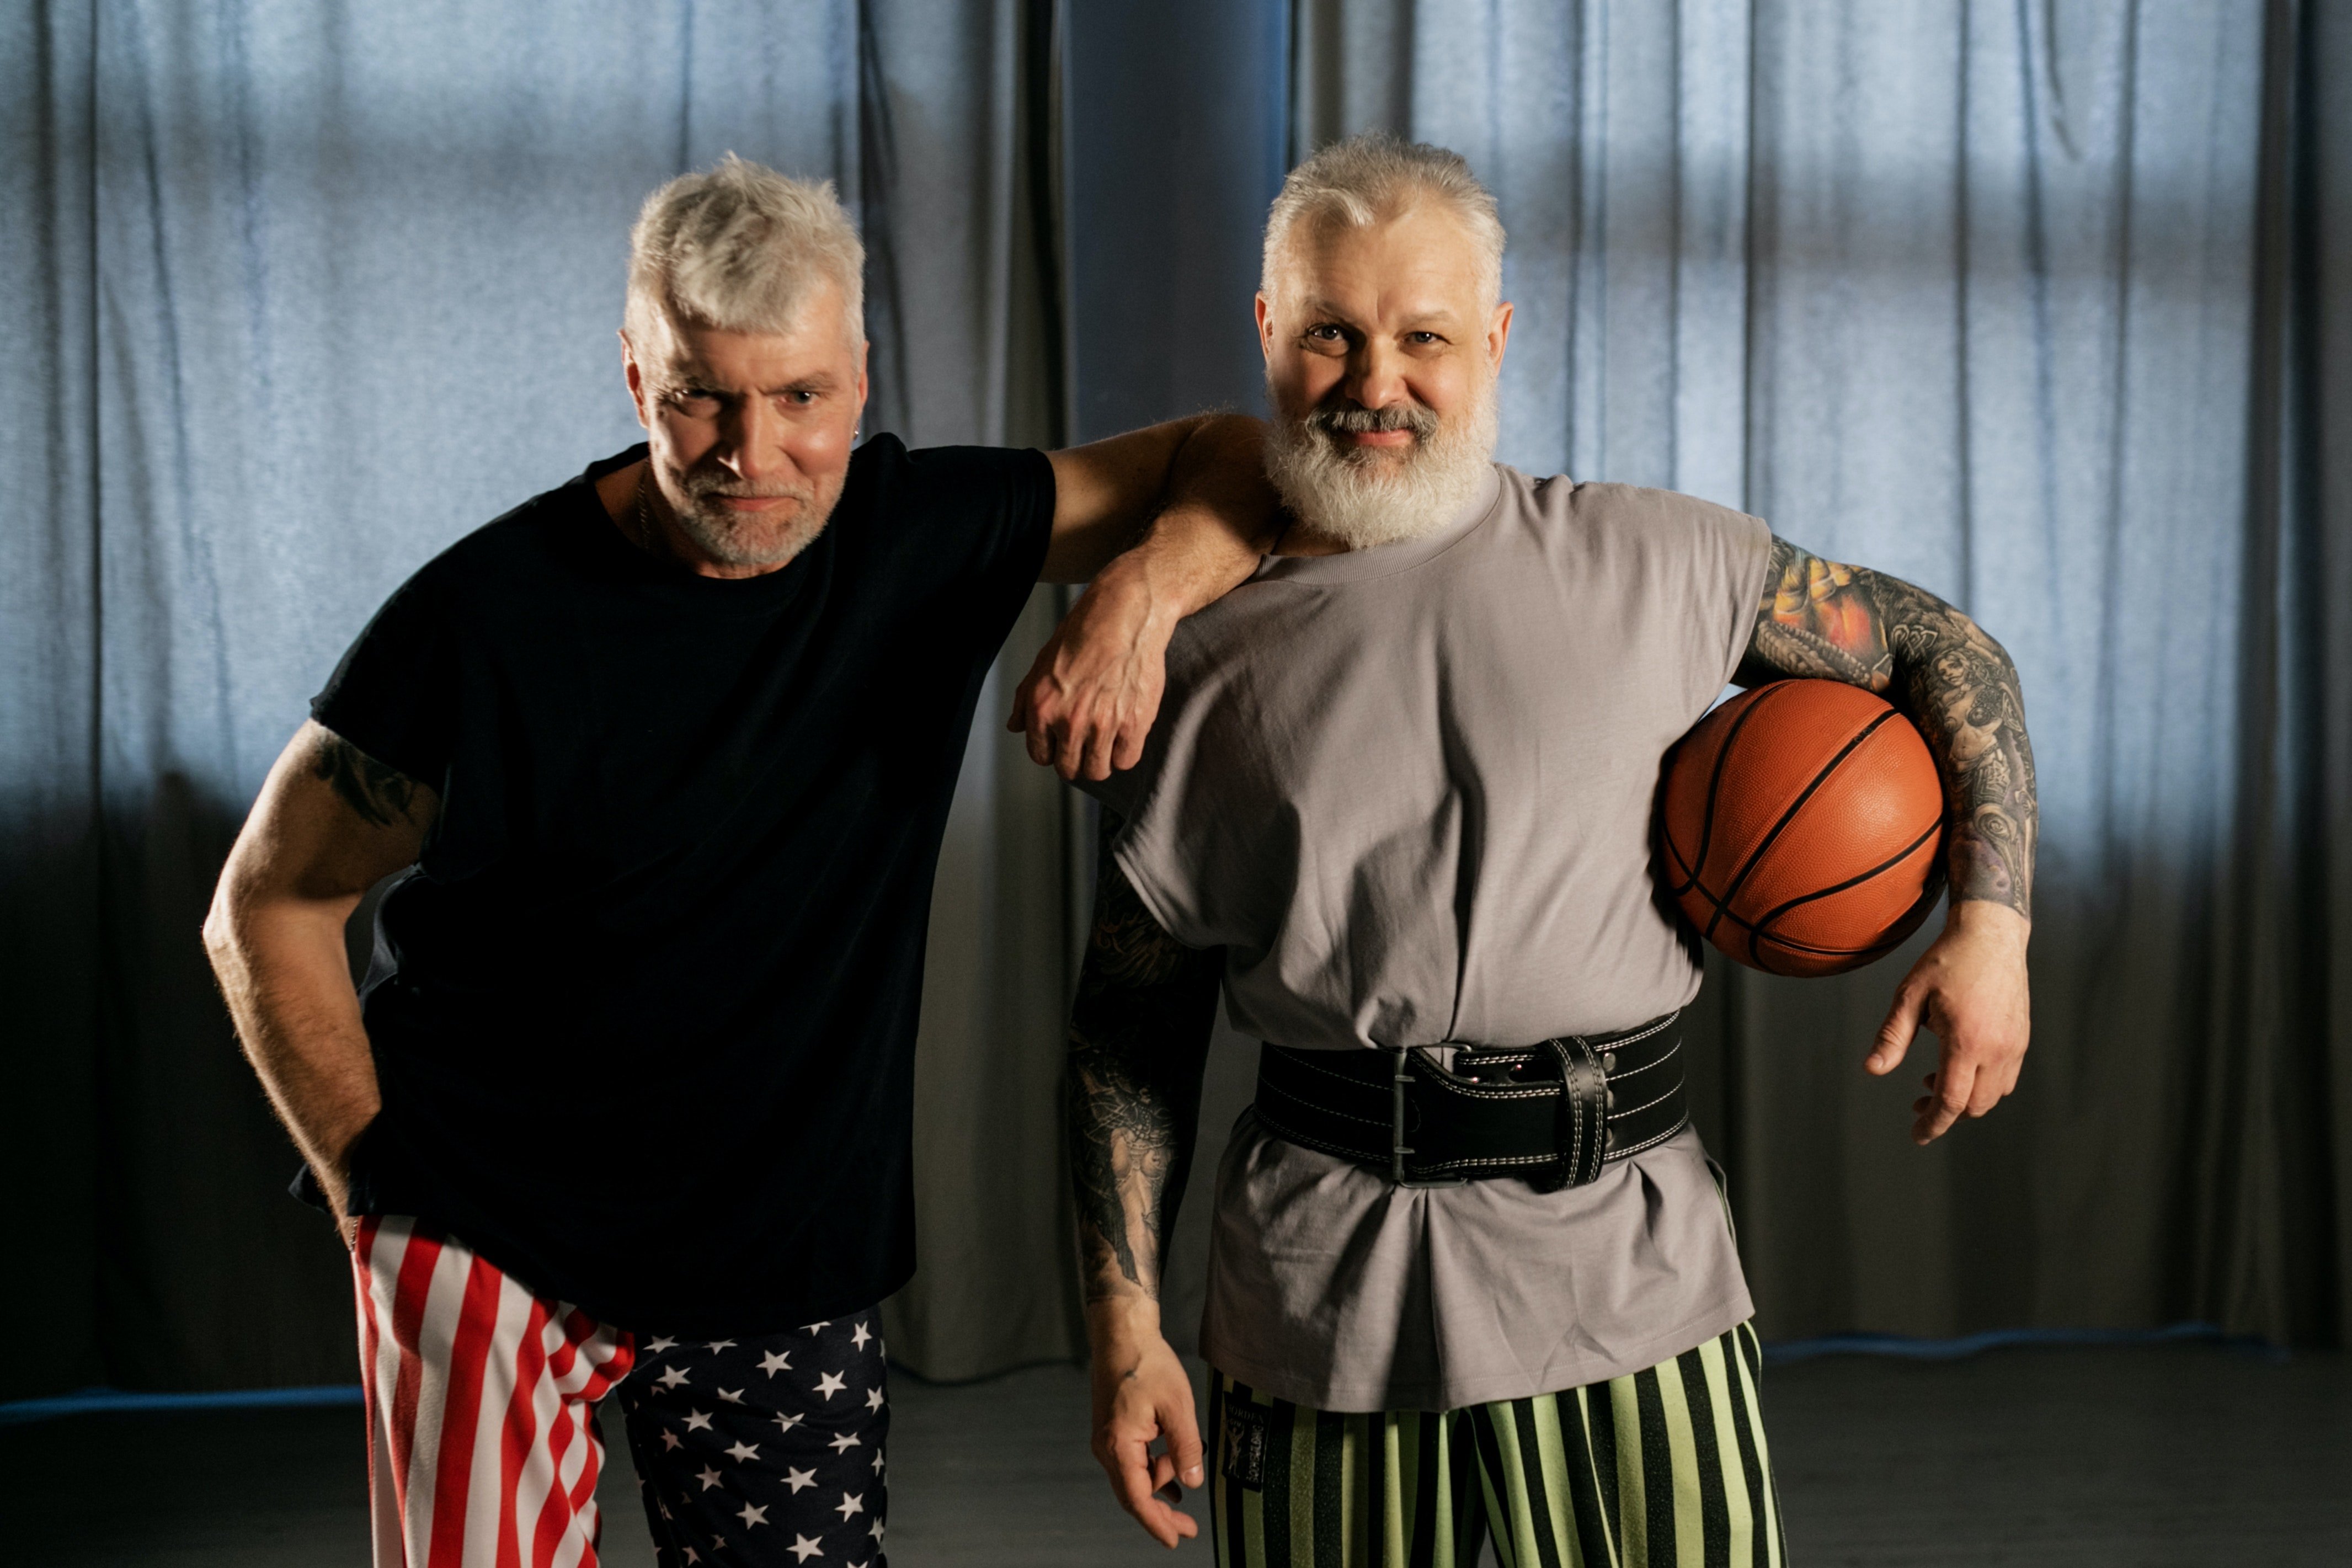 Pictured - Two elderly men smiling while one holds a basketball ball | Source: Pexels